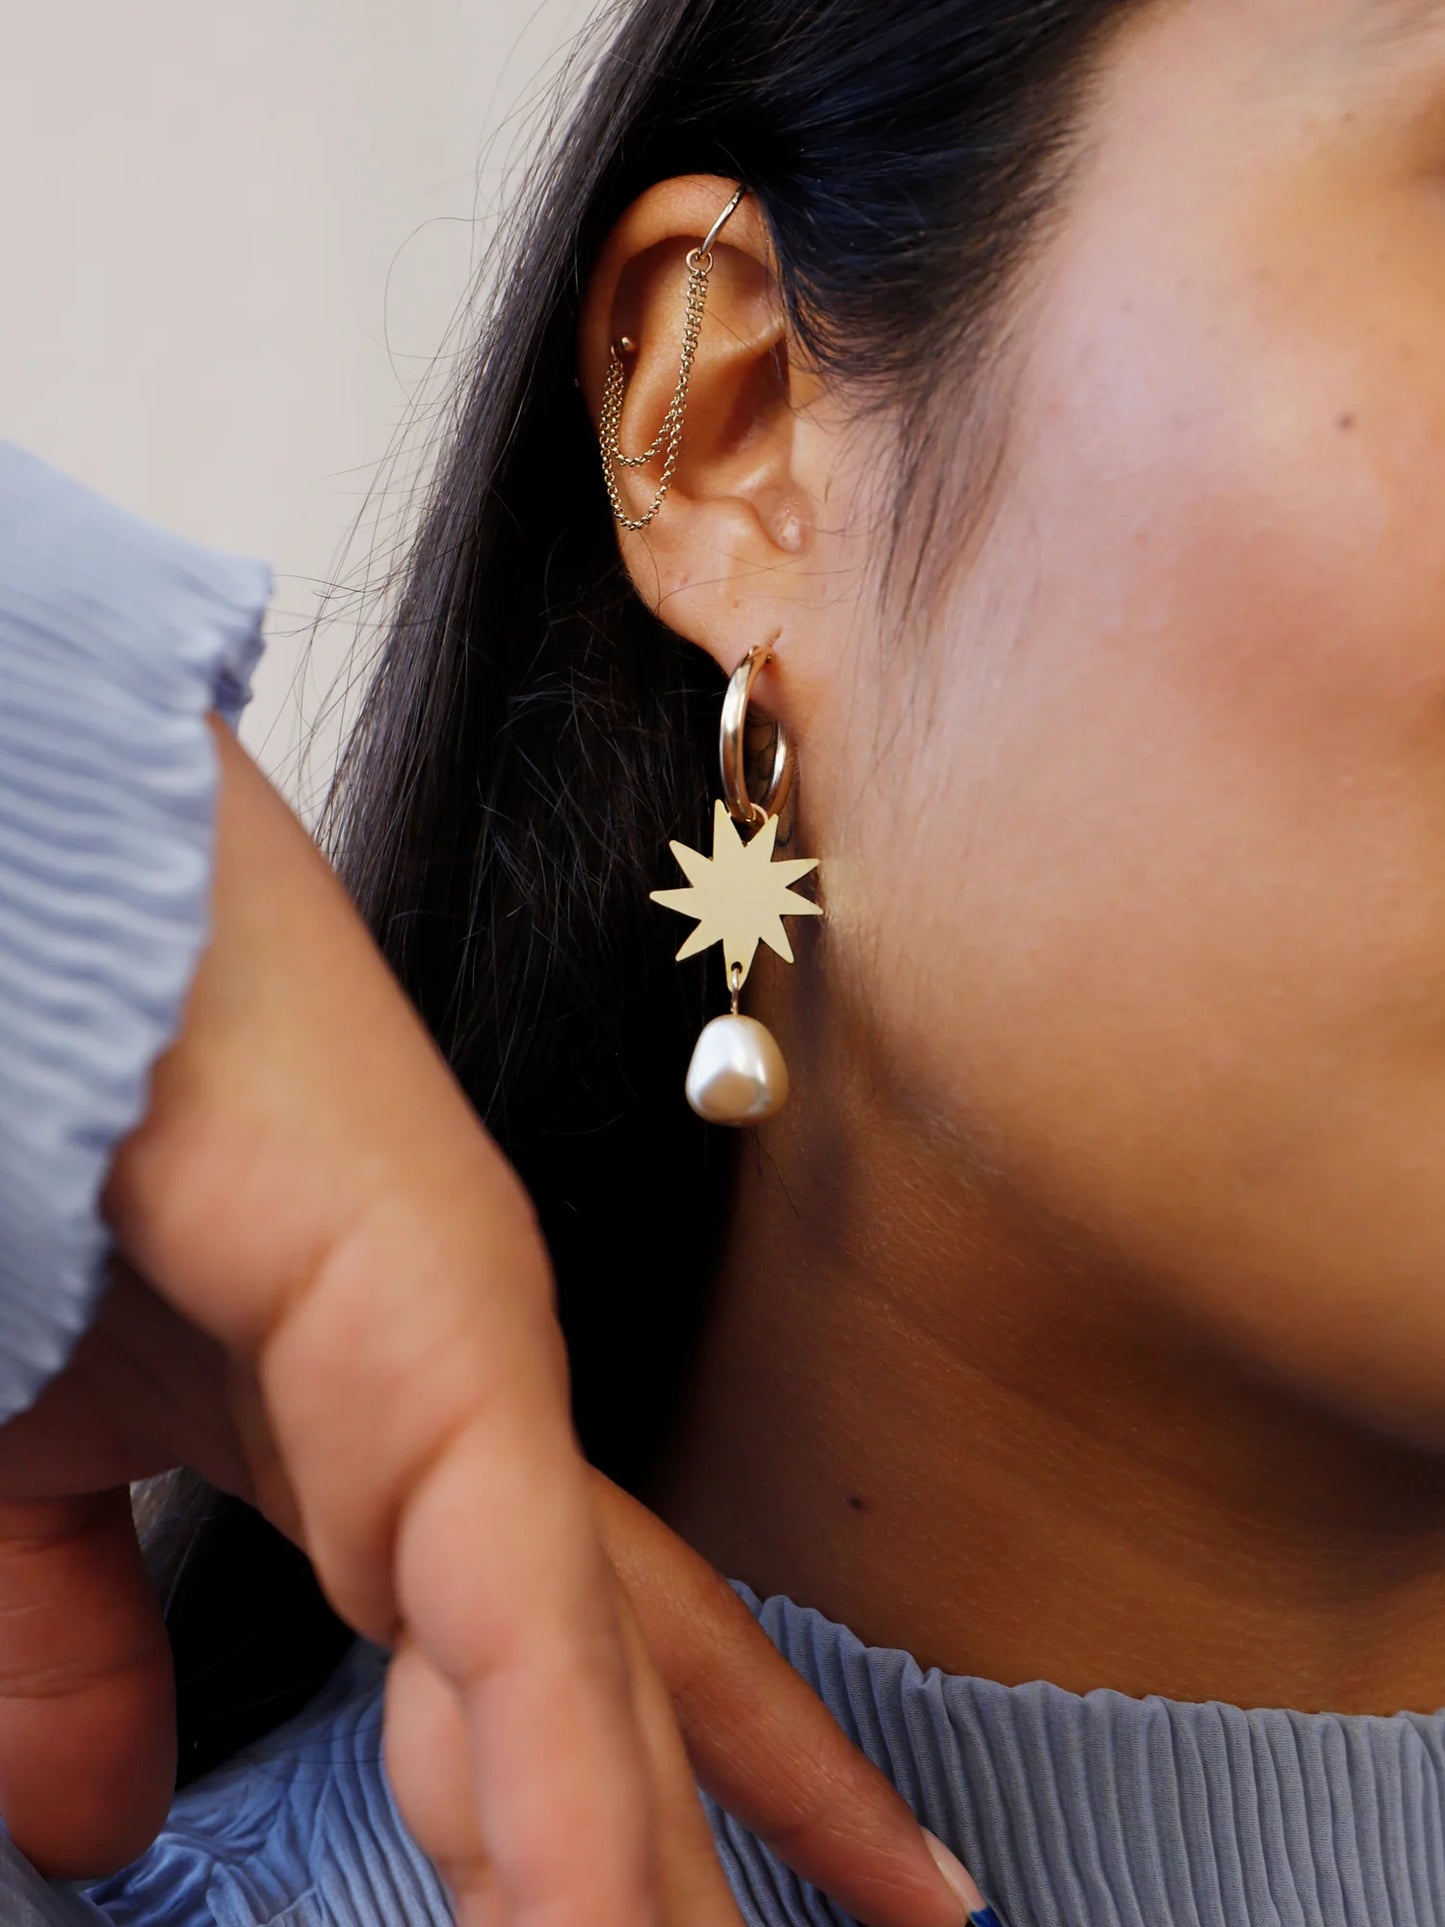 Kara hoop earring with star and pearl pendant from Wolf&Moon close up